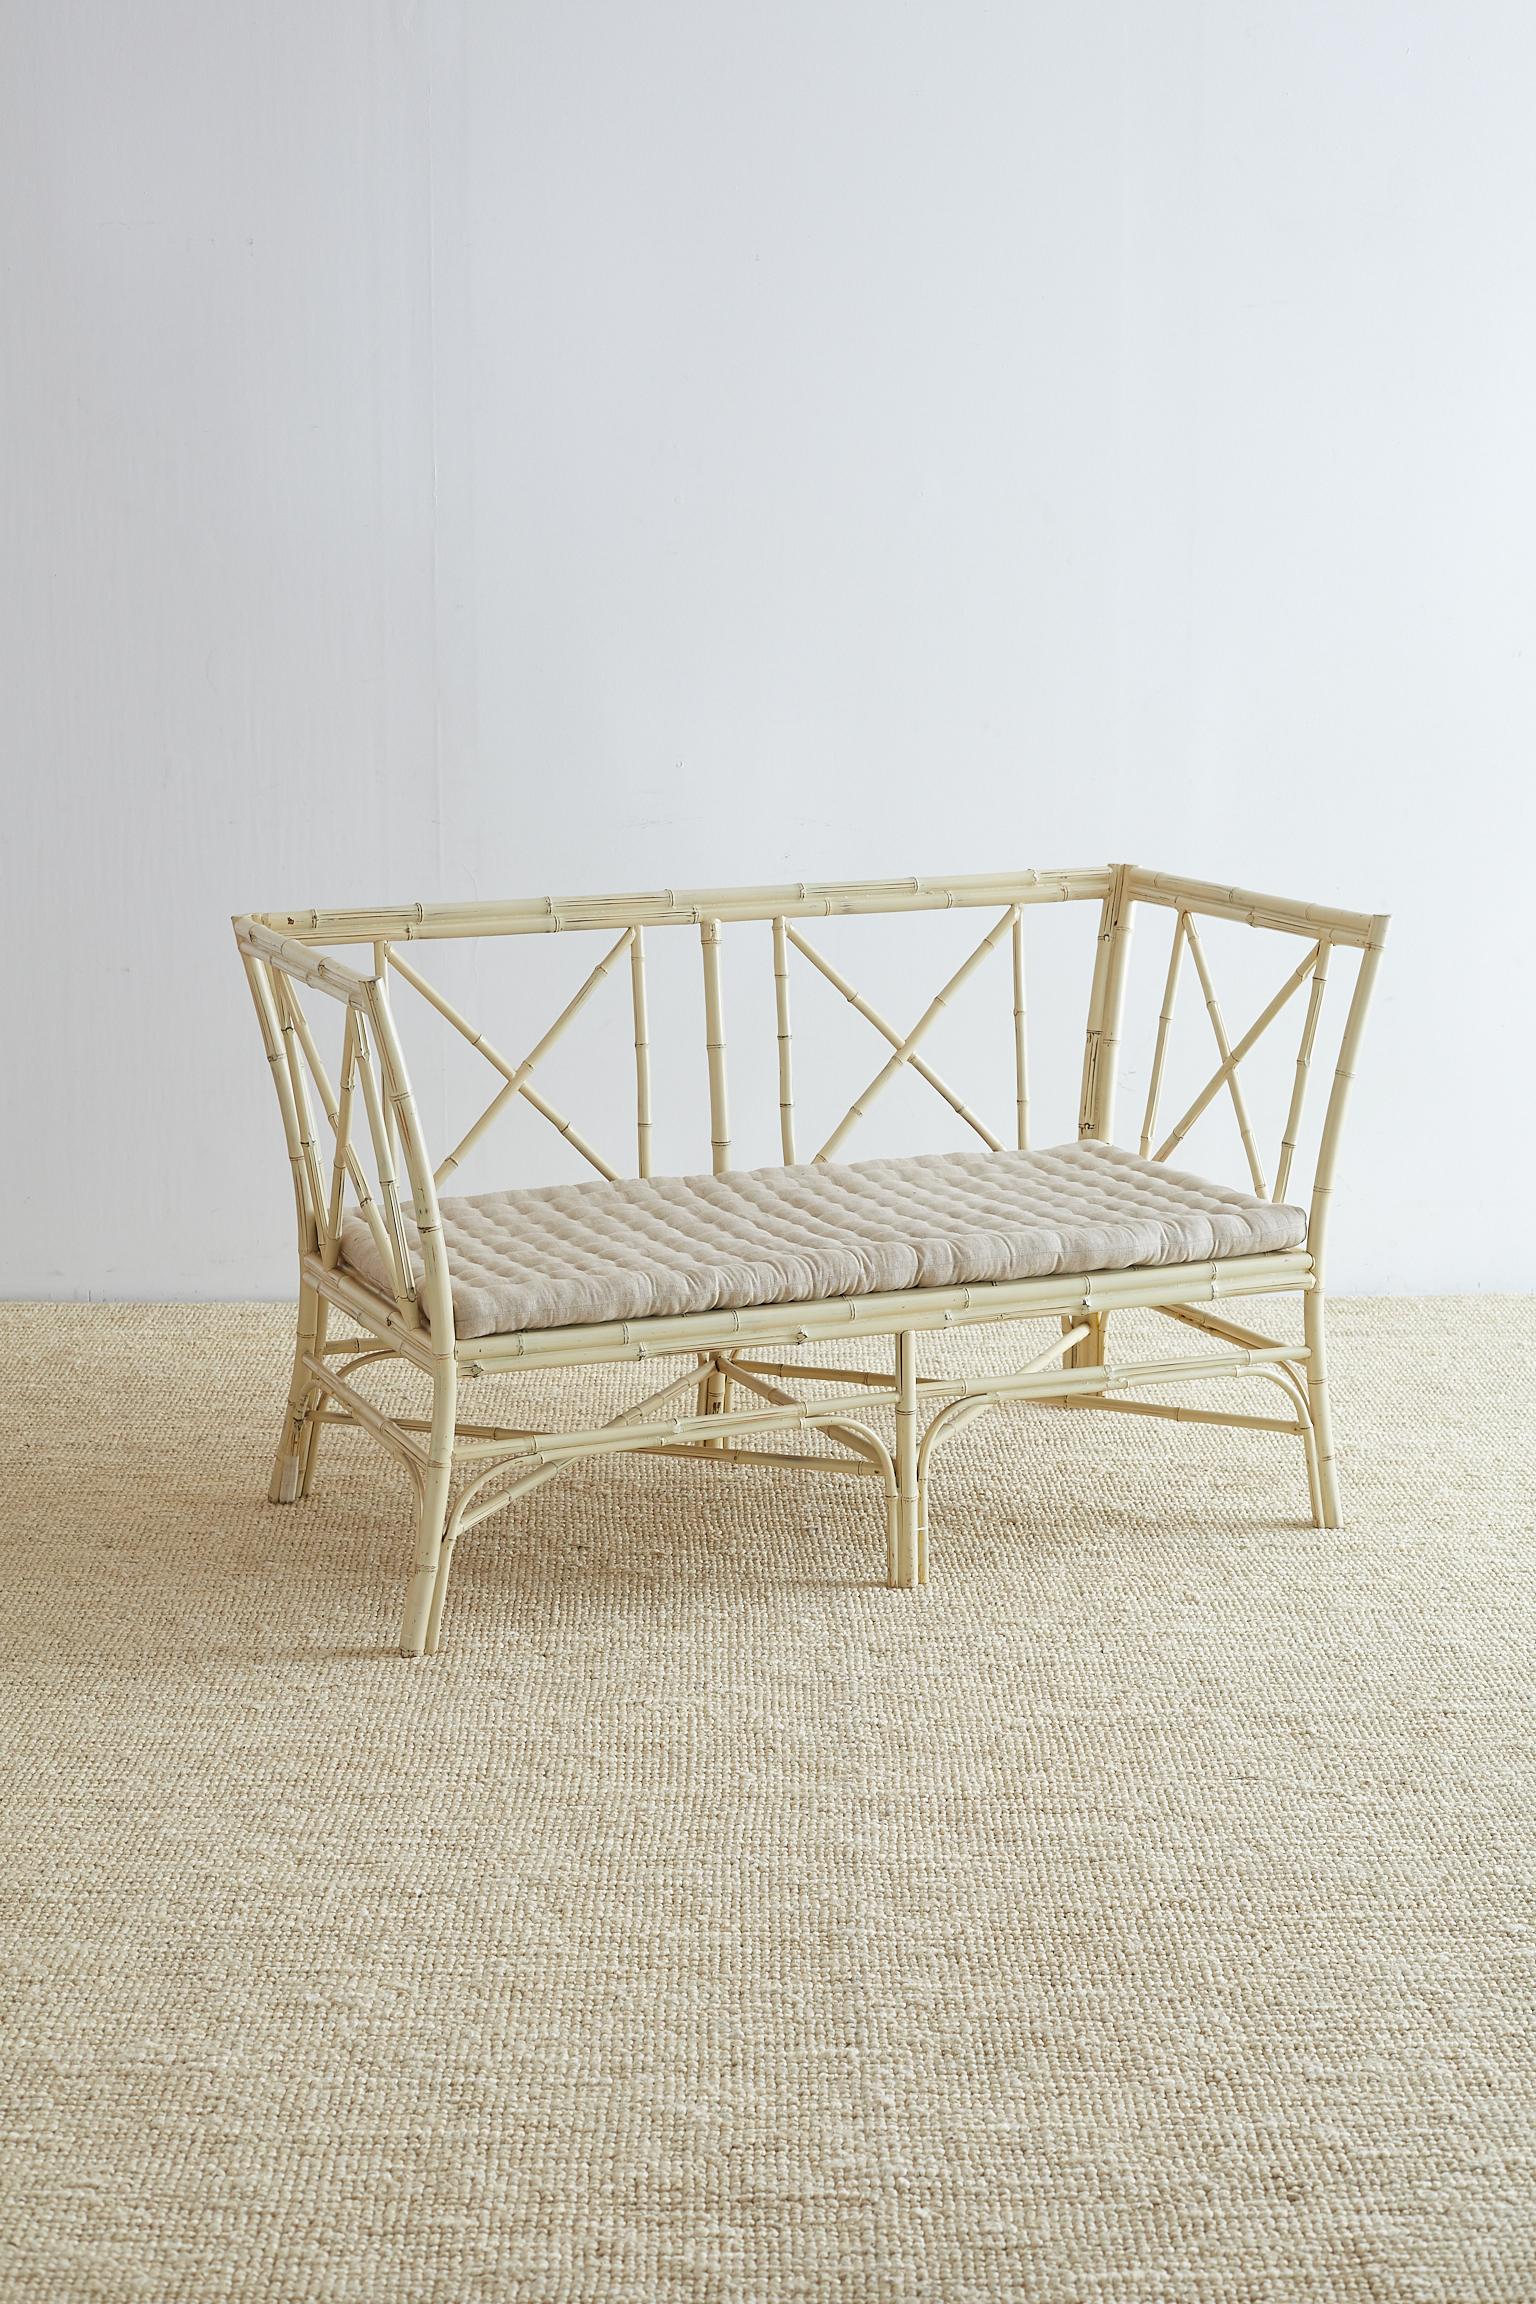 Hollywood Regency Lacquered Bamboo Settee or Bench 1